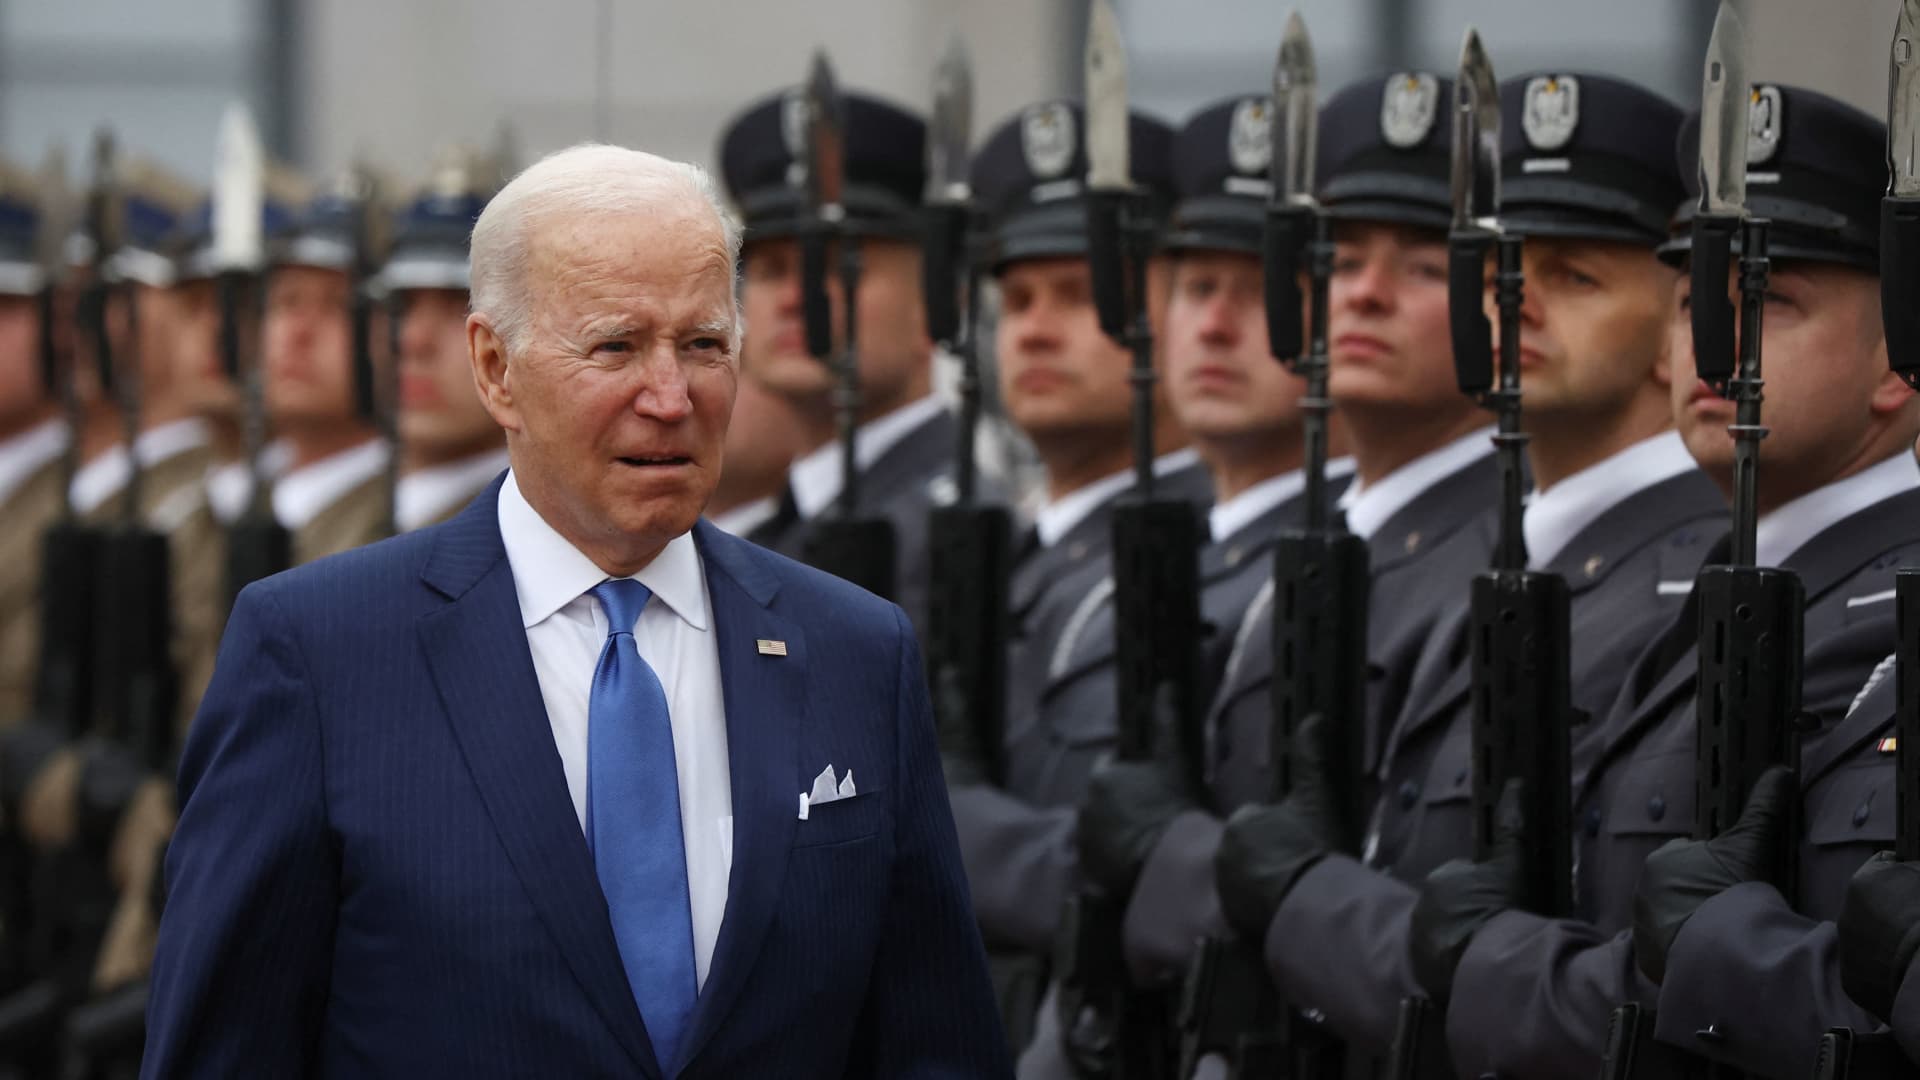 U.S. President Joe Biden reviews the Guard of Honor ahead of his meeting with Polish President Andrzej Duda, as the Russian invasion of Ukraine continues, outside the Presidential Palace in Warsaw, Poland March 26, 2022. 